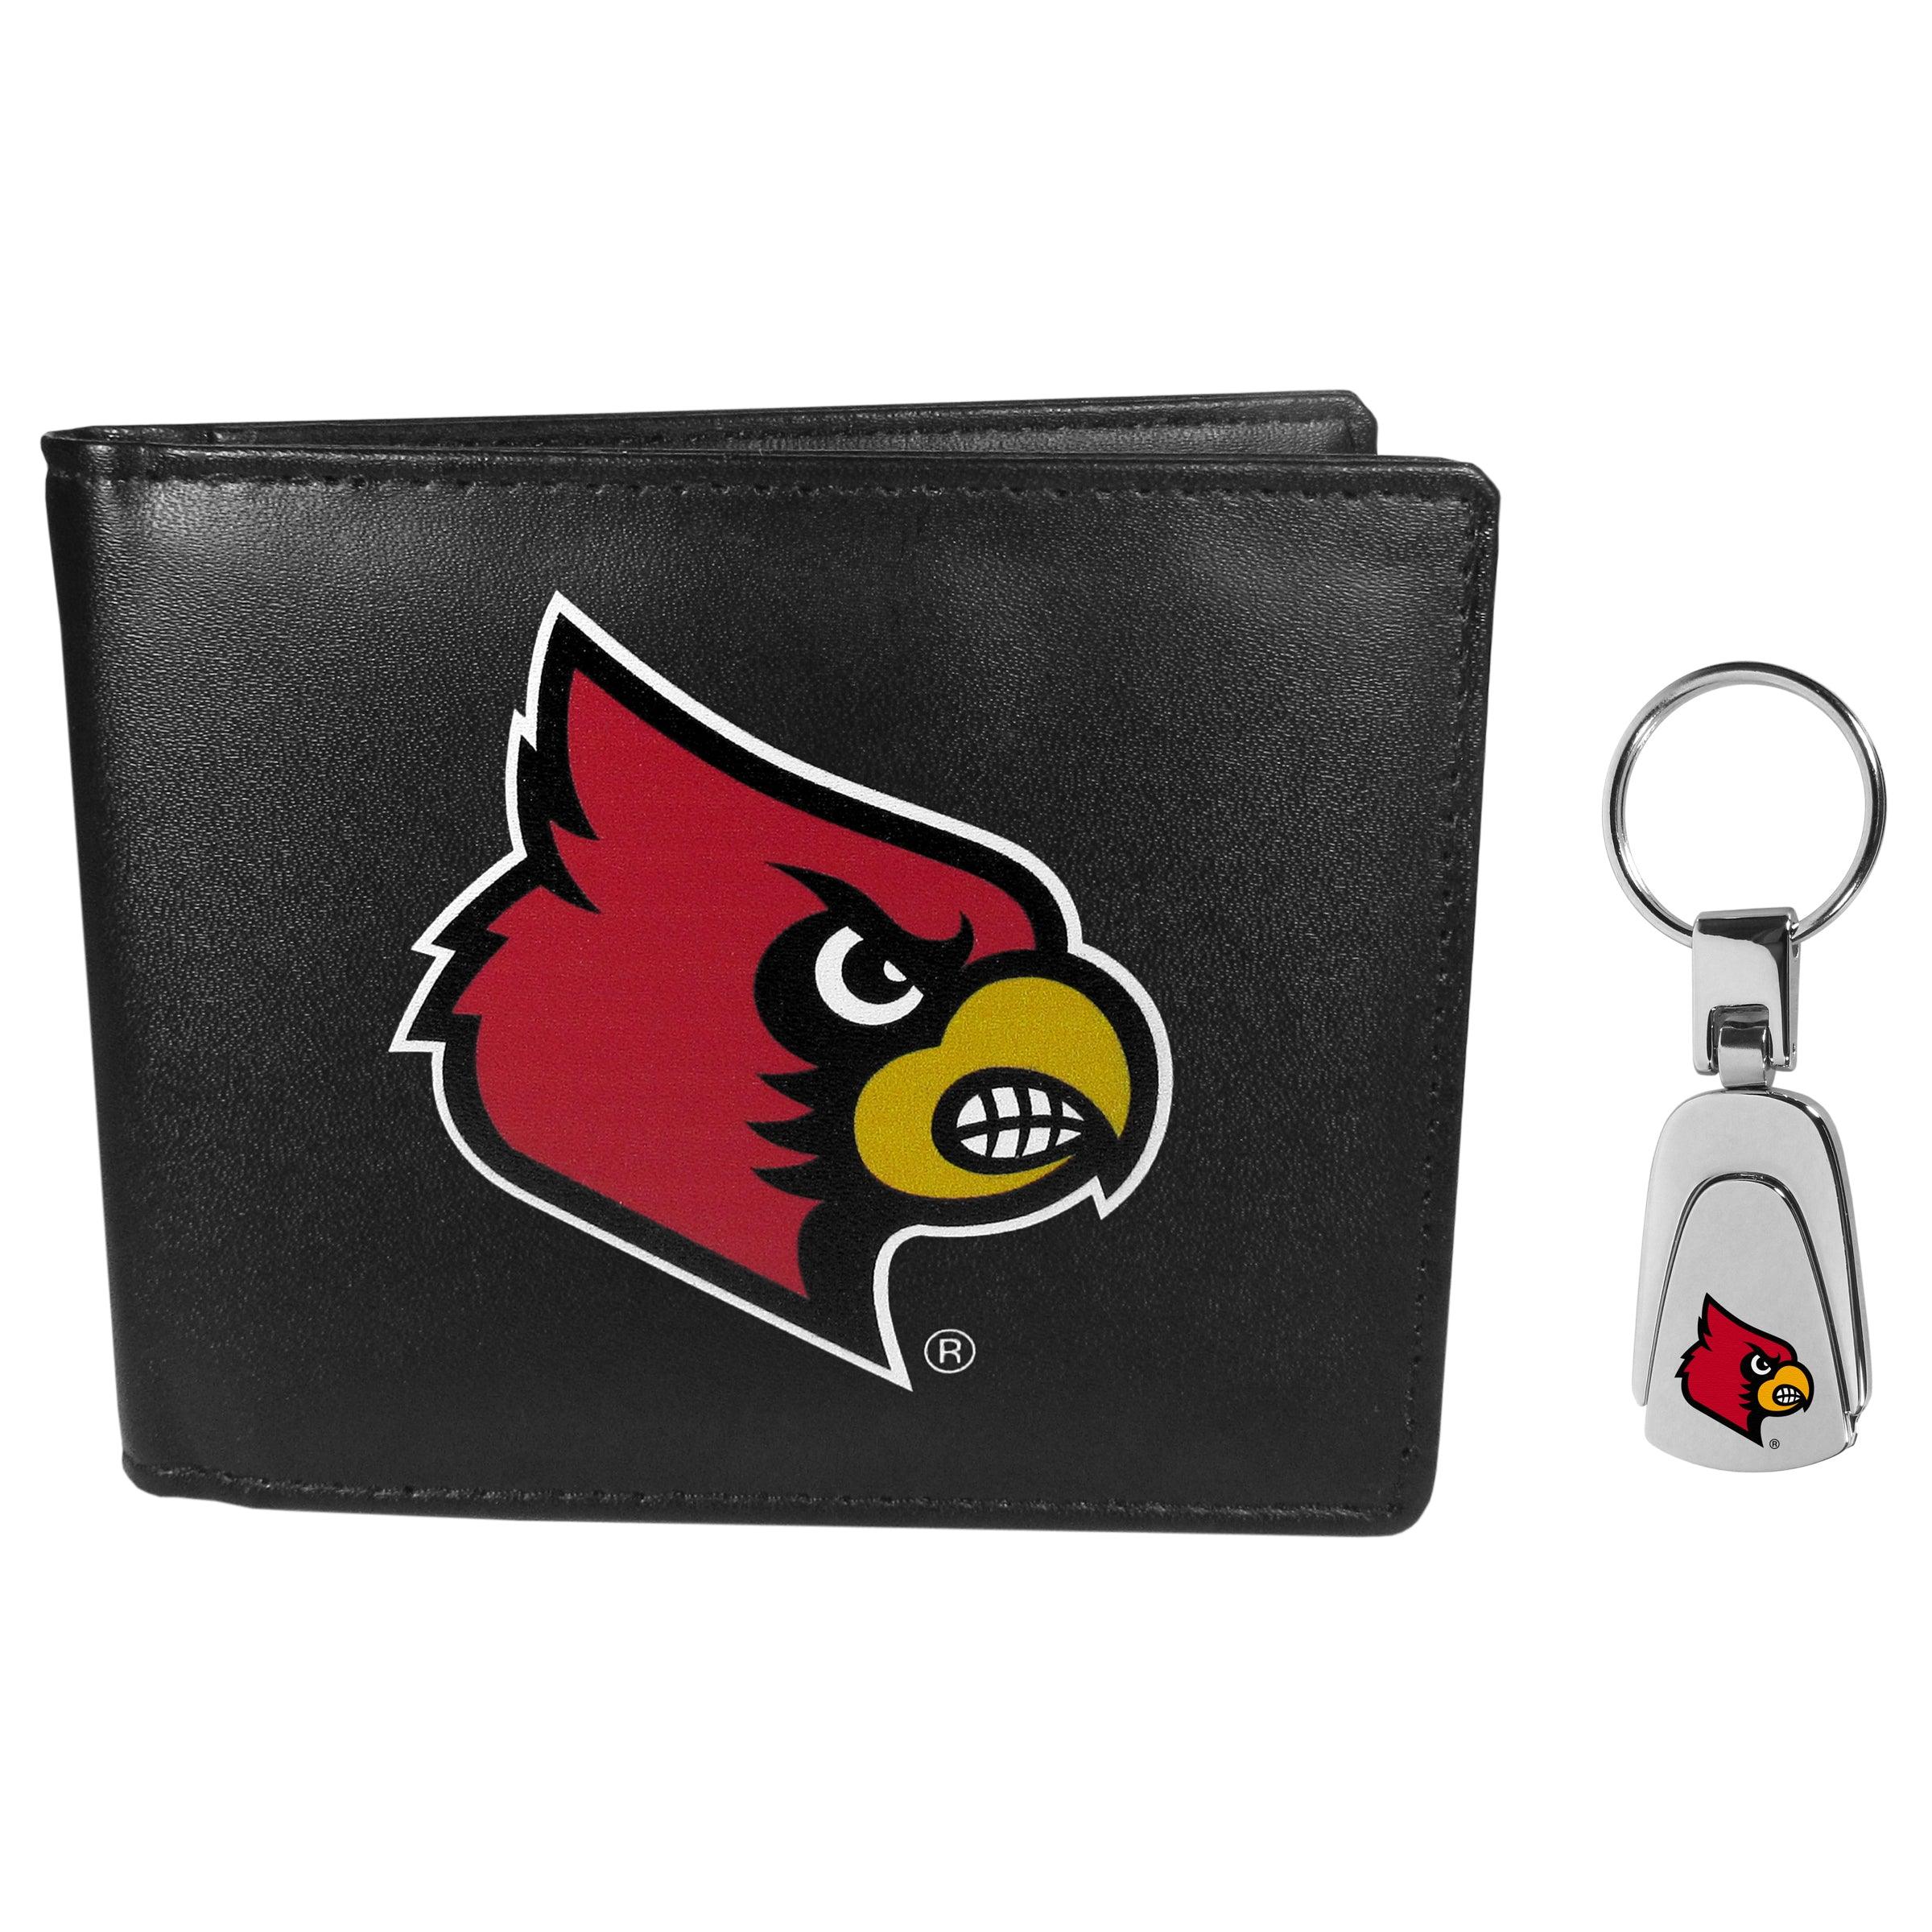 UofL Backpack CLASSIC STYLE Red